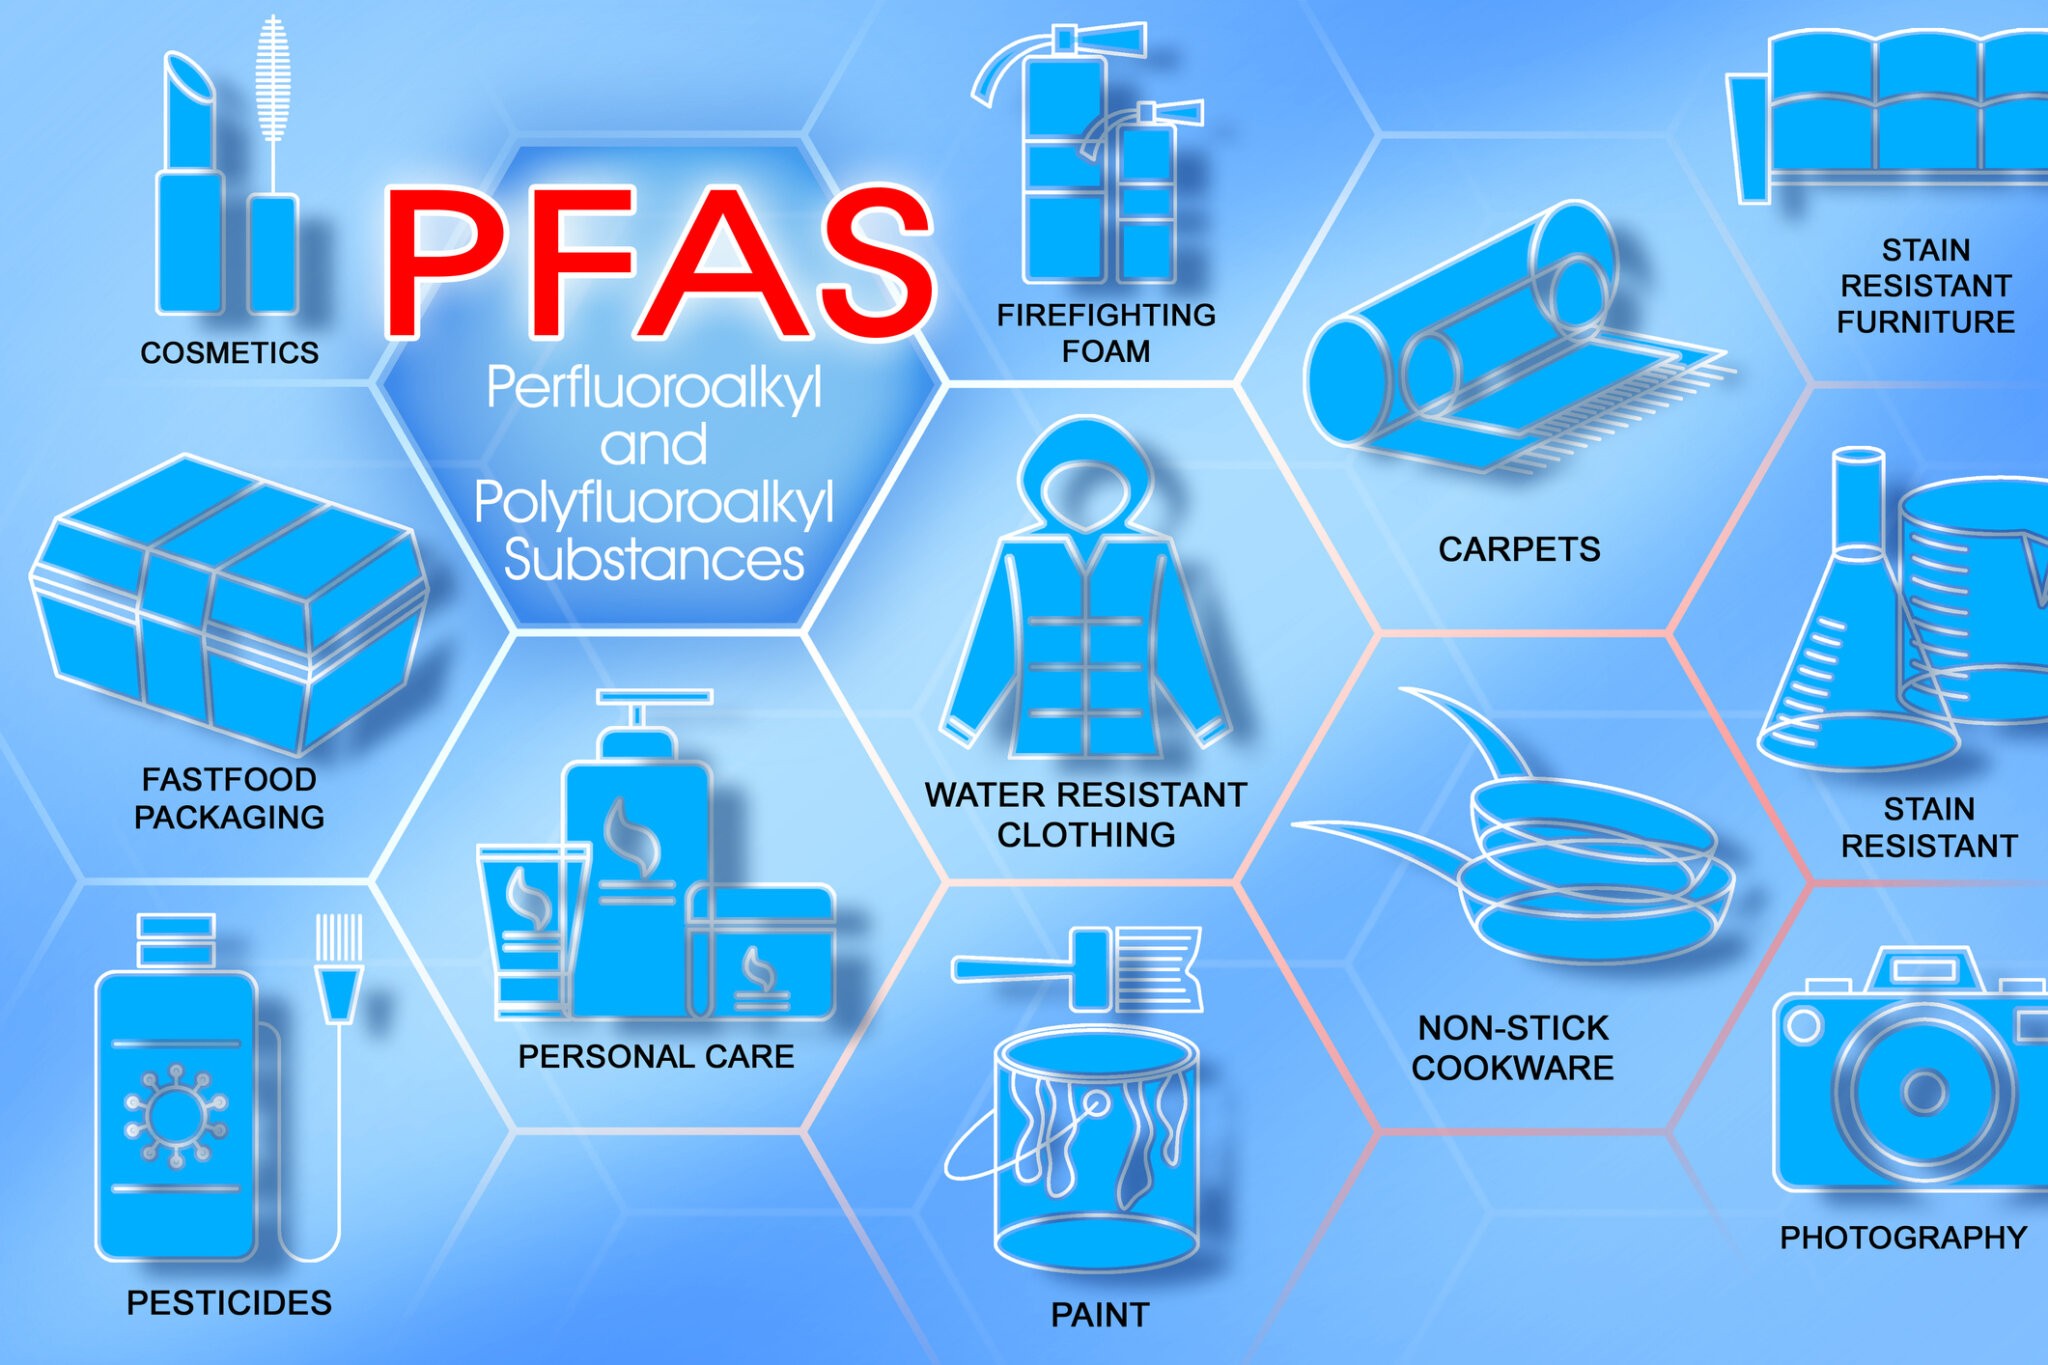 What is dangerous PFAS - Perfluoroalkyl and Polyfluoroalkyl Substances - and where is it found?PFAS are dangerous synthetic organofluorine chemical compounds water